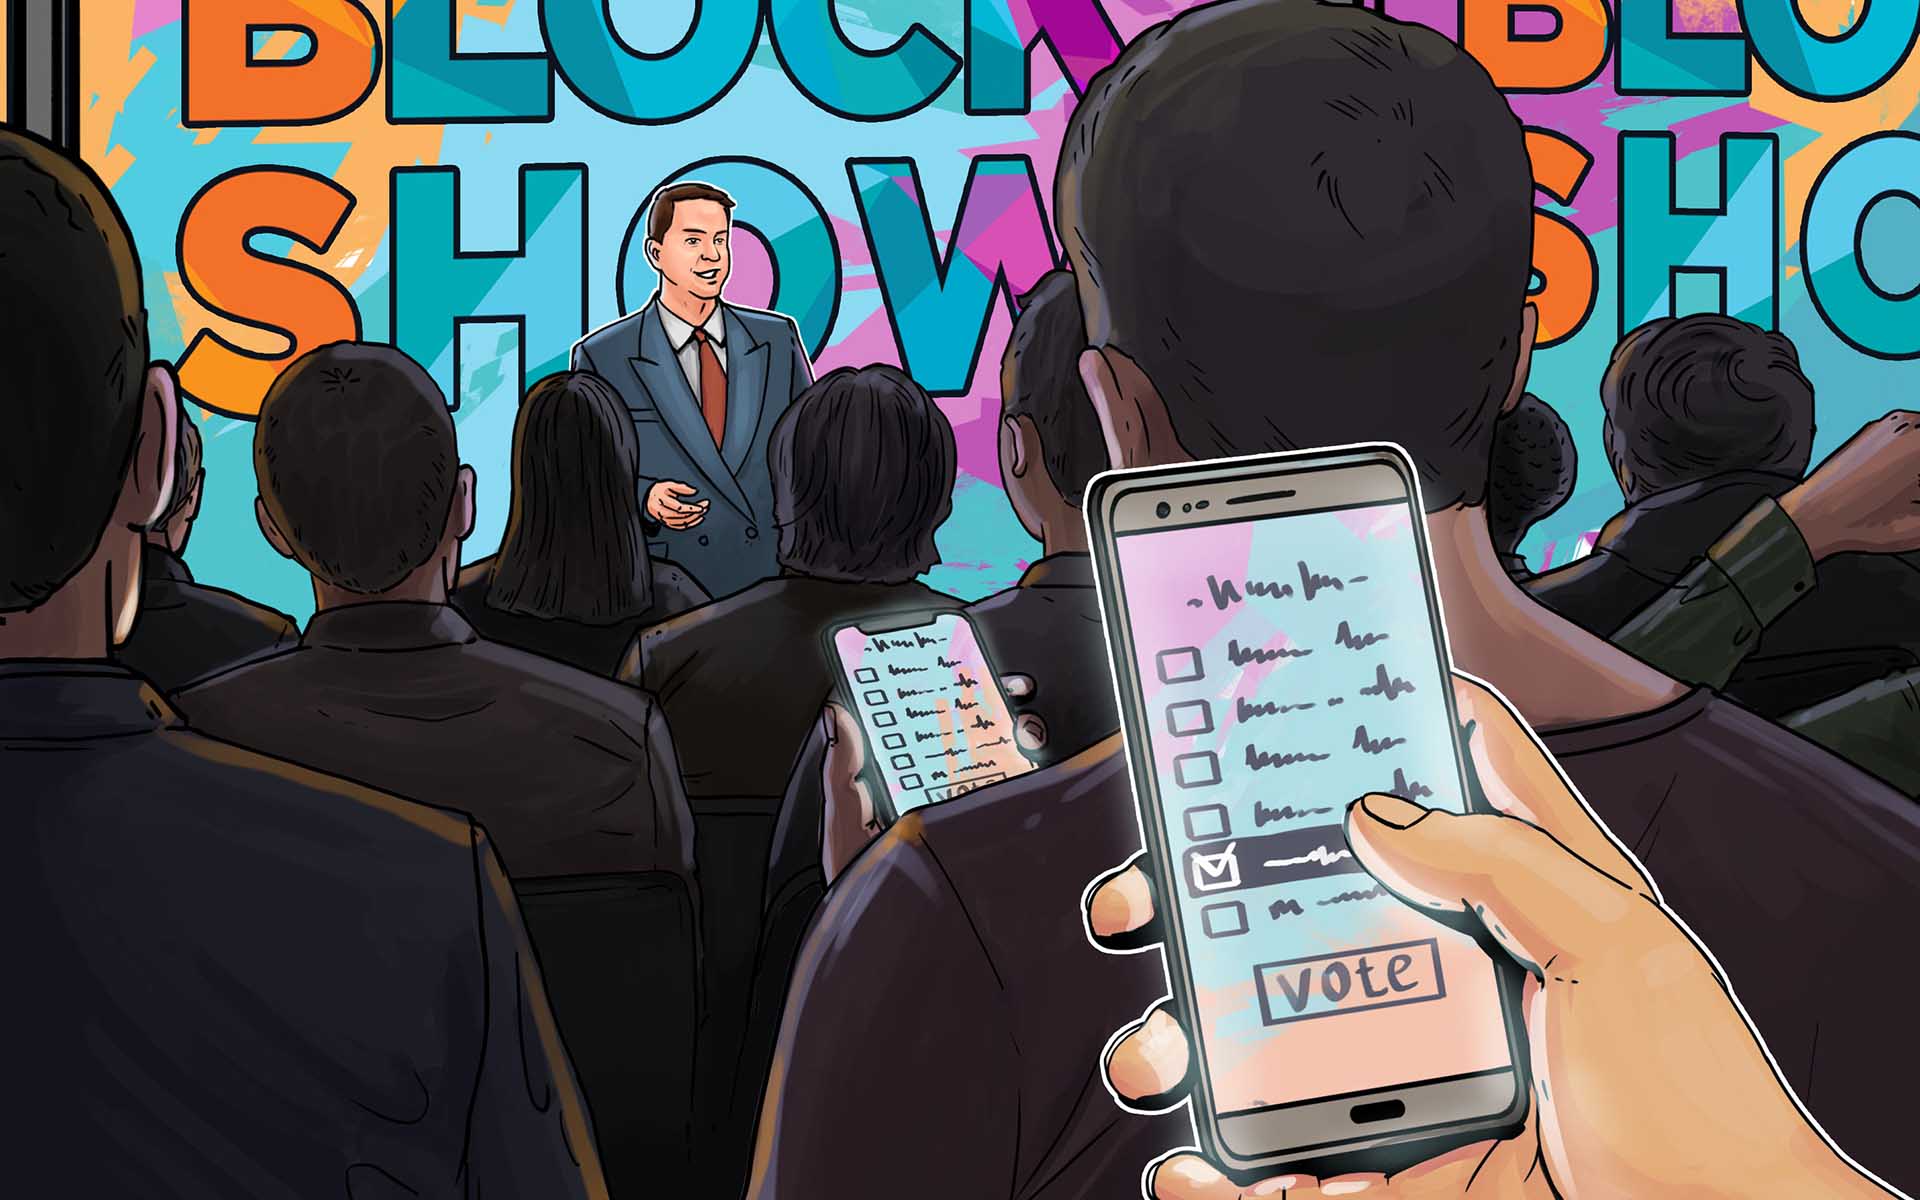 BlockShow Set to Use World’s First Blockchain Polling Application During Their Blockchain Conference in Berlin